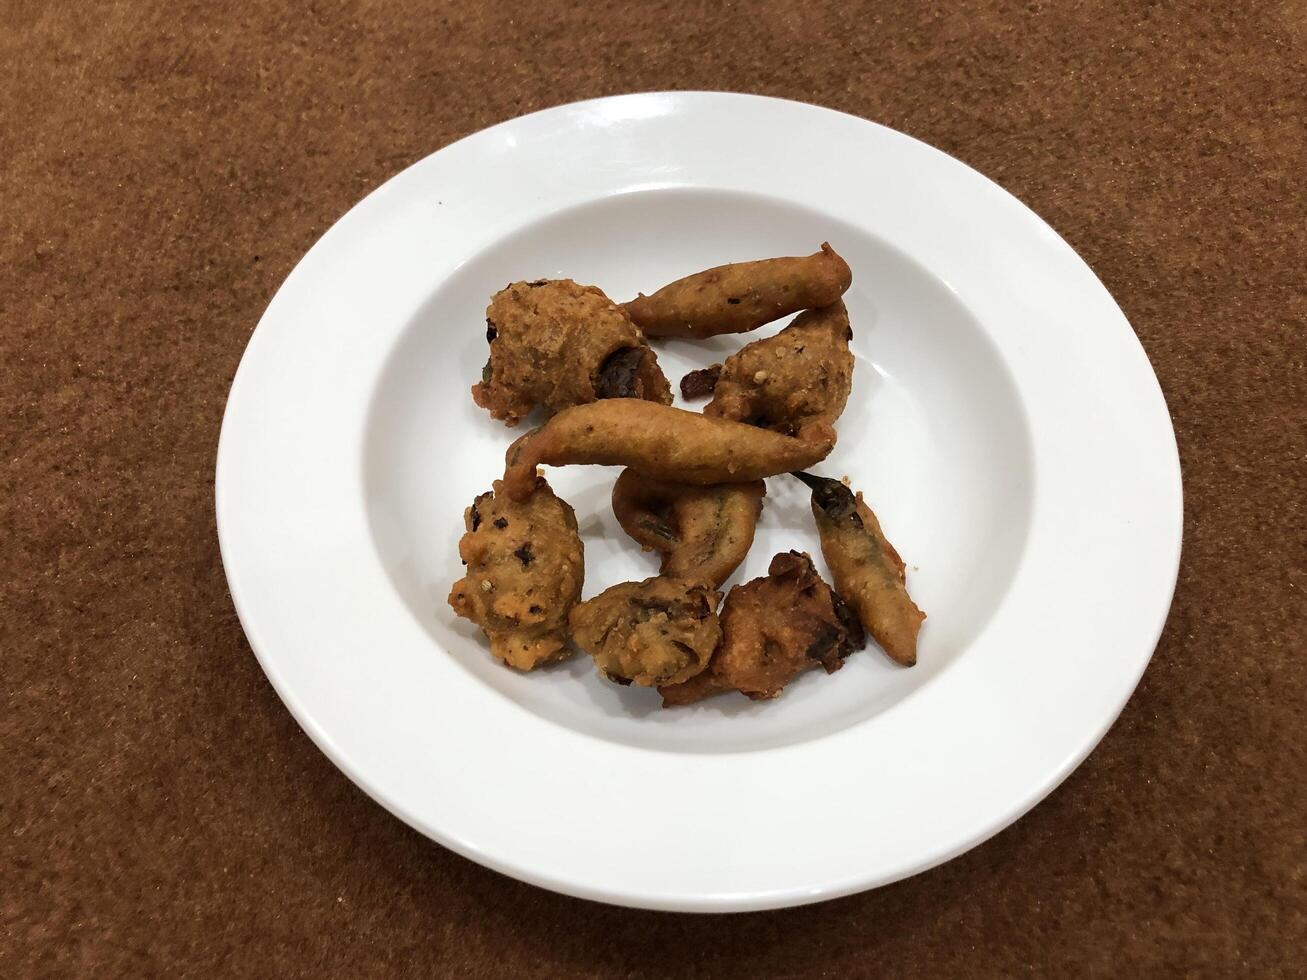 Mirchi pakora or Mirchi bhajji served in a white plate, a famous midday snack in india, served over a rustic wooden background, selective focus photo